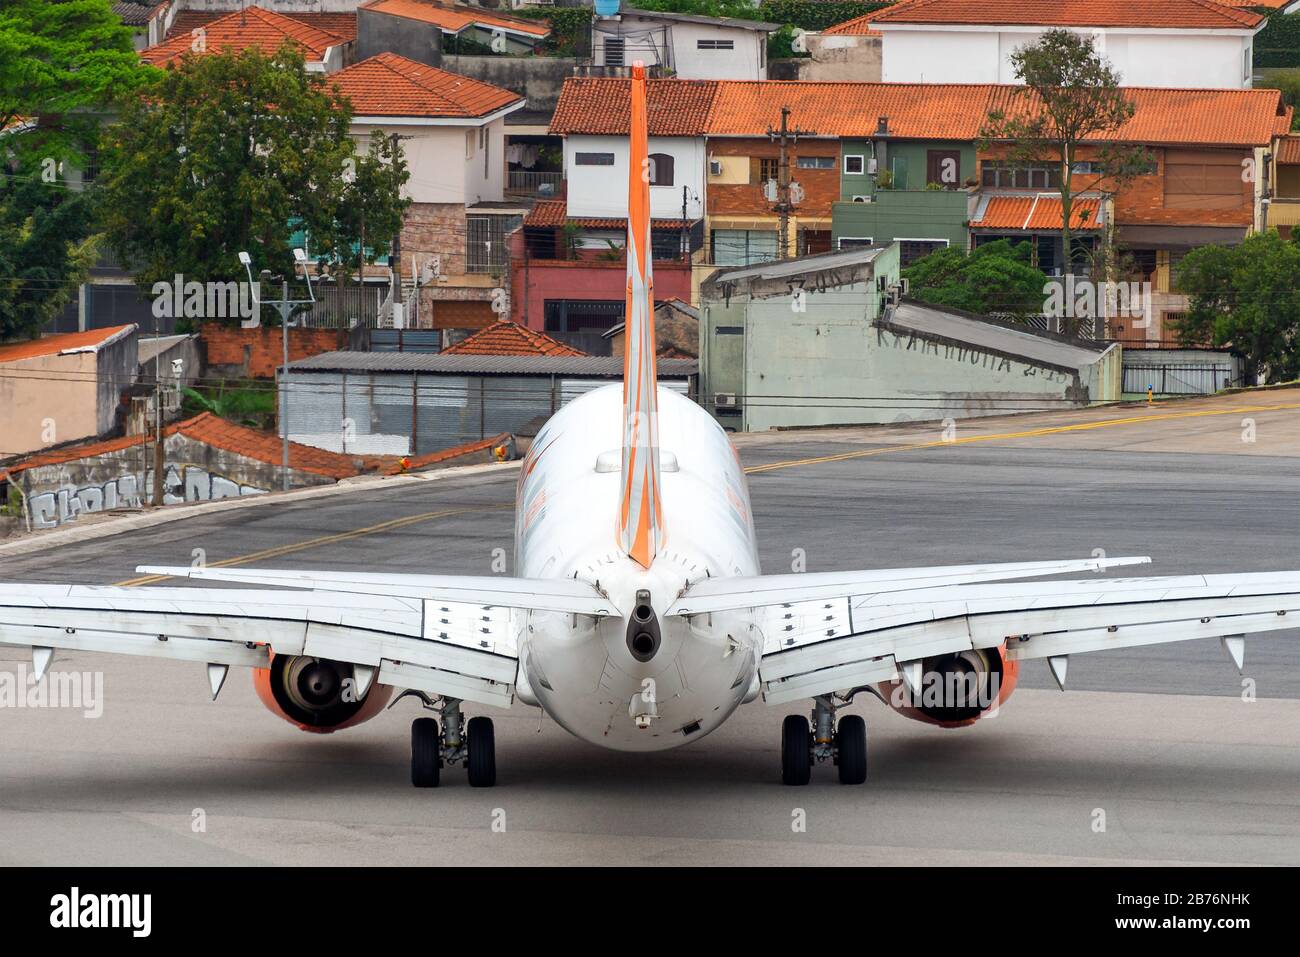 Brazilian airline GOL operating its Boeing 737 in Congonhas Airport, know as the concrete jungle by its central location in Sao Paulo, Brazil. Stock Photo